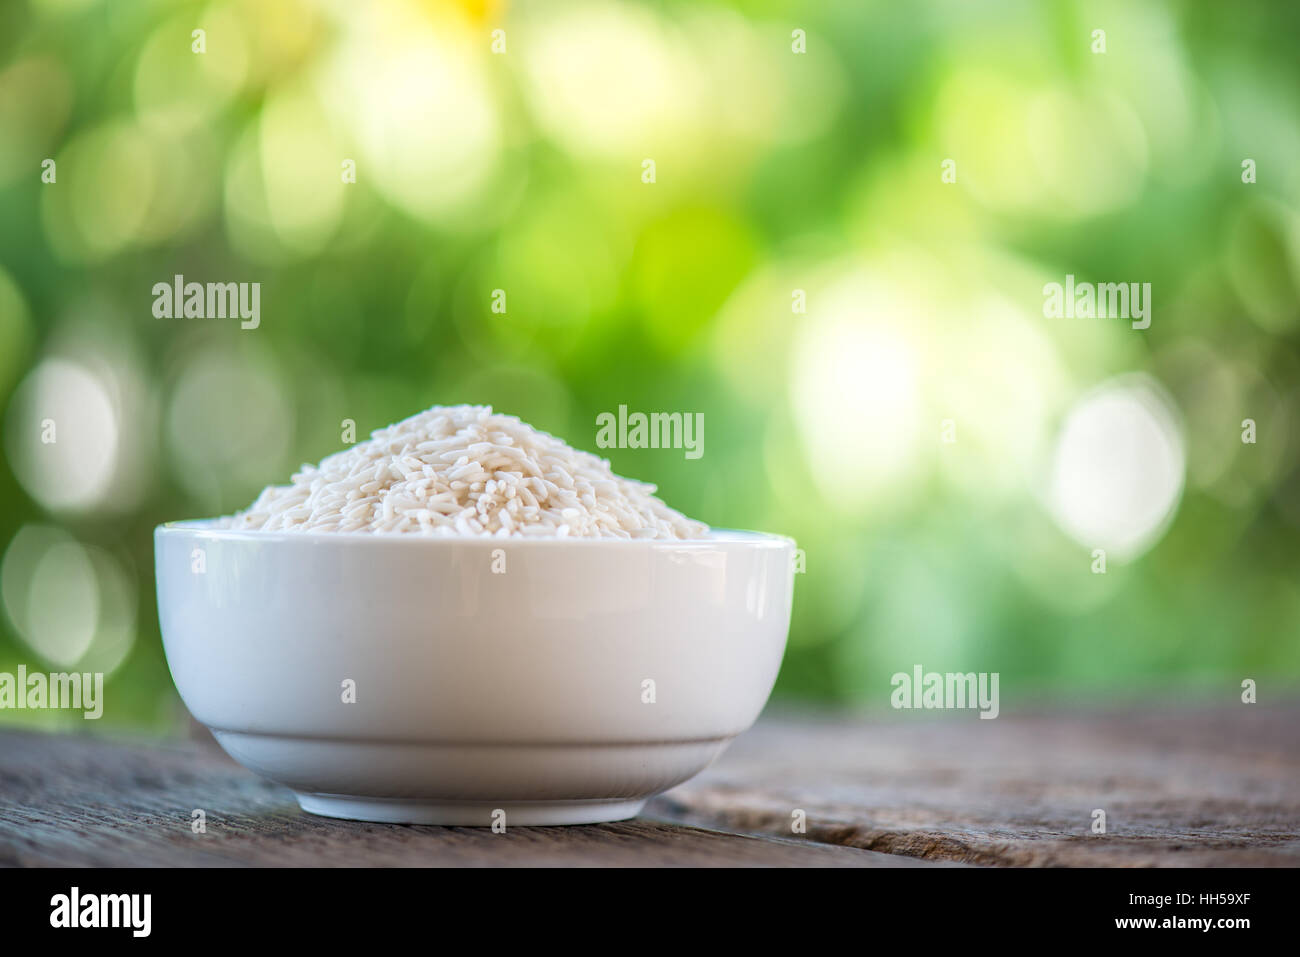 sticky rice in a white bowl Stock Photo